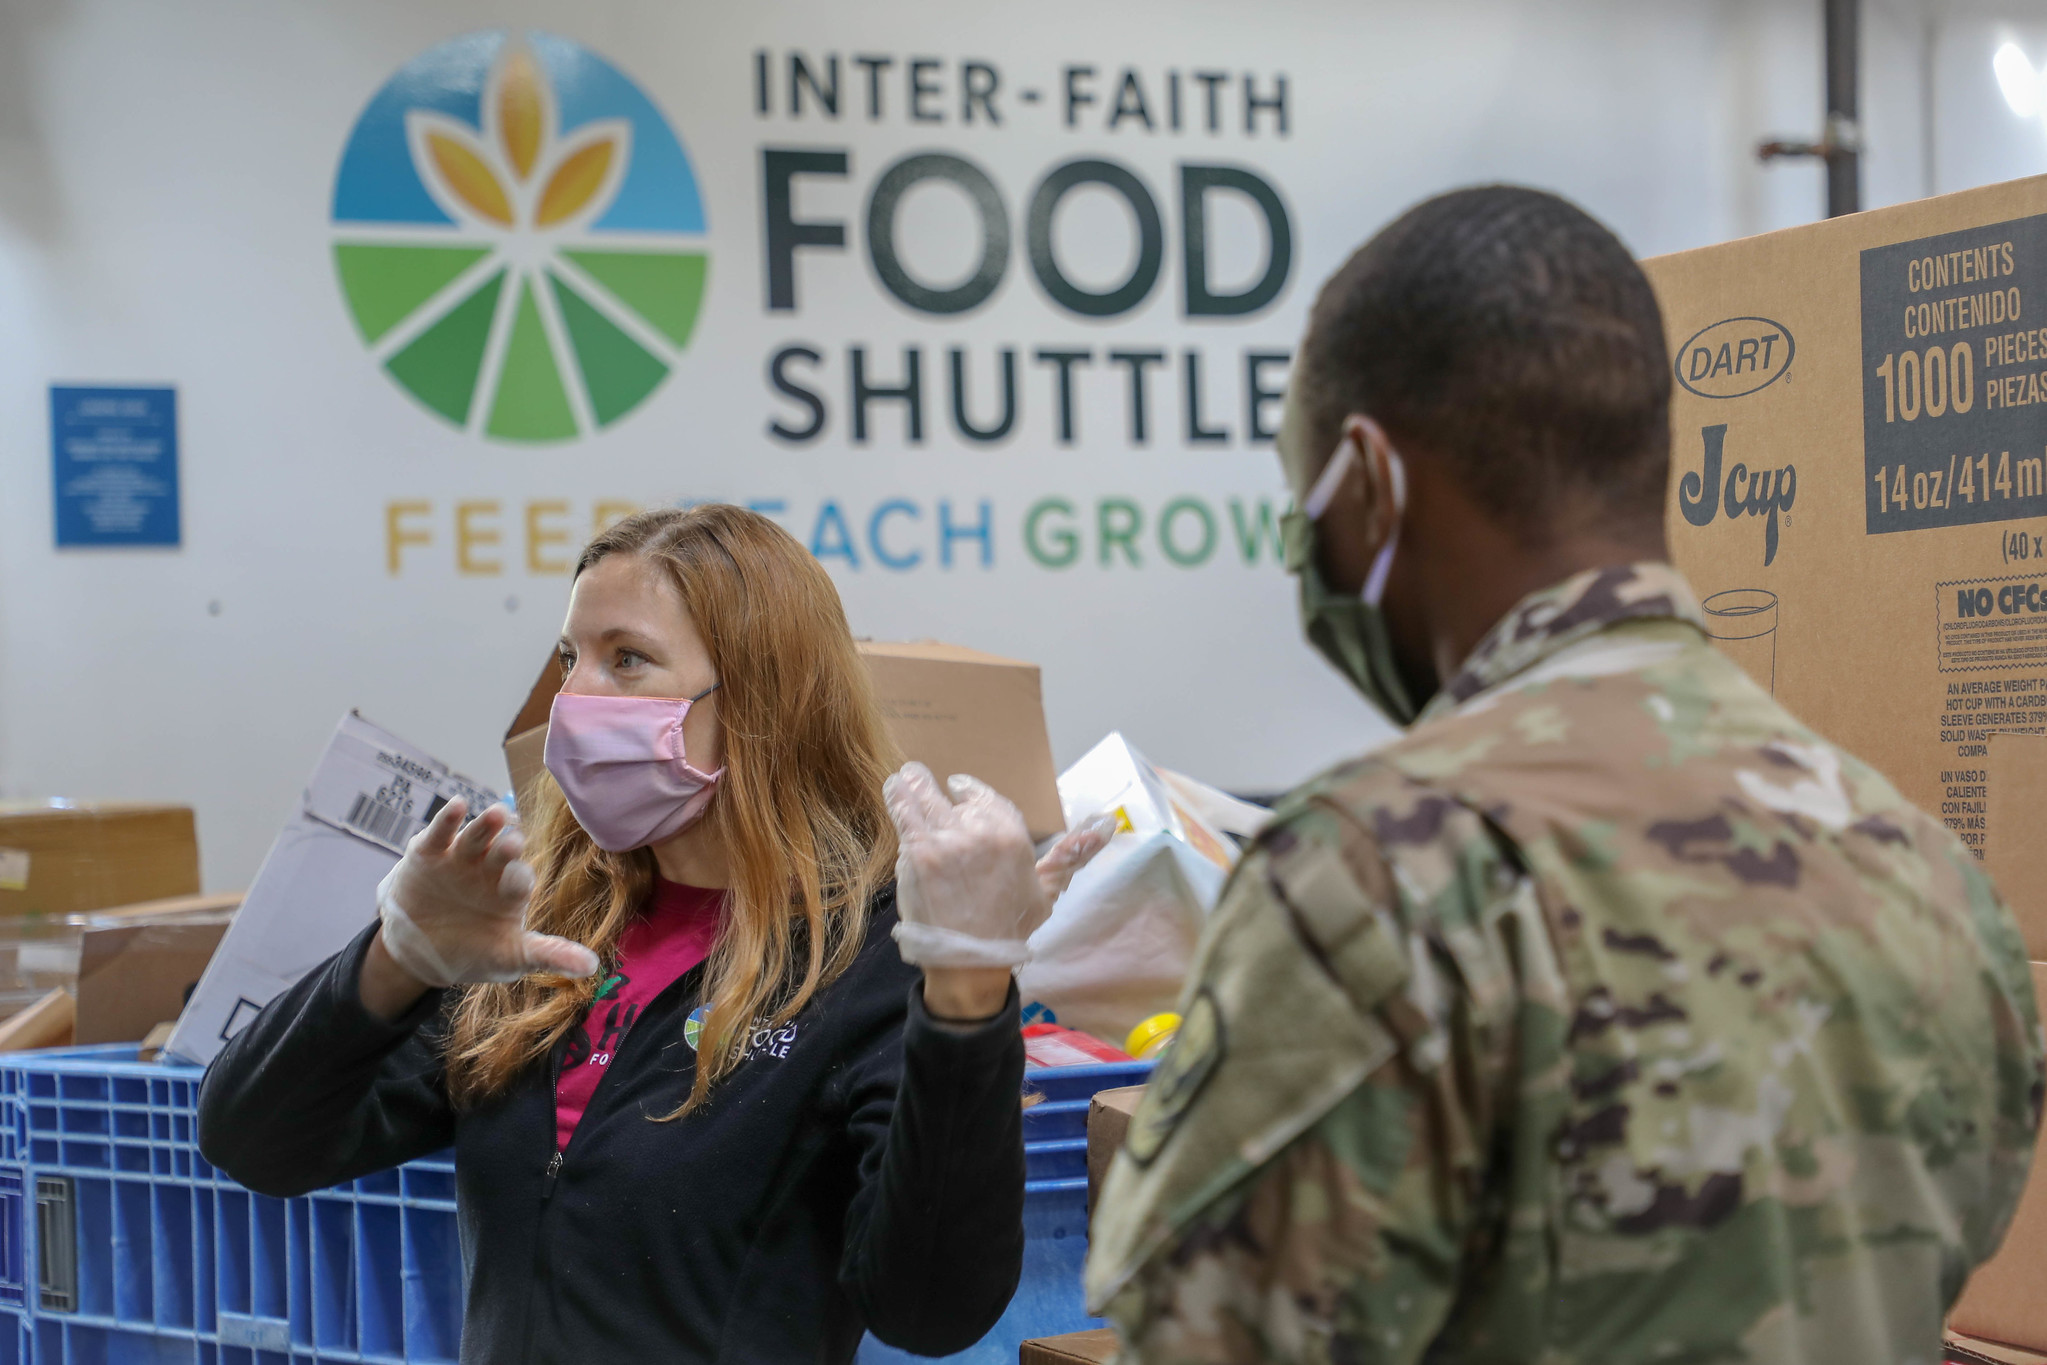 A woman wearing a mask and gloves stands next to a man wearing a mask and fatigues and in fromt of a Food bank sign and groceries.